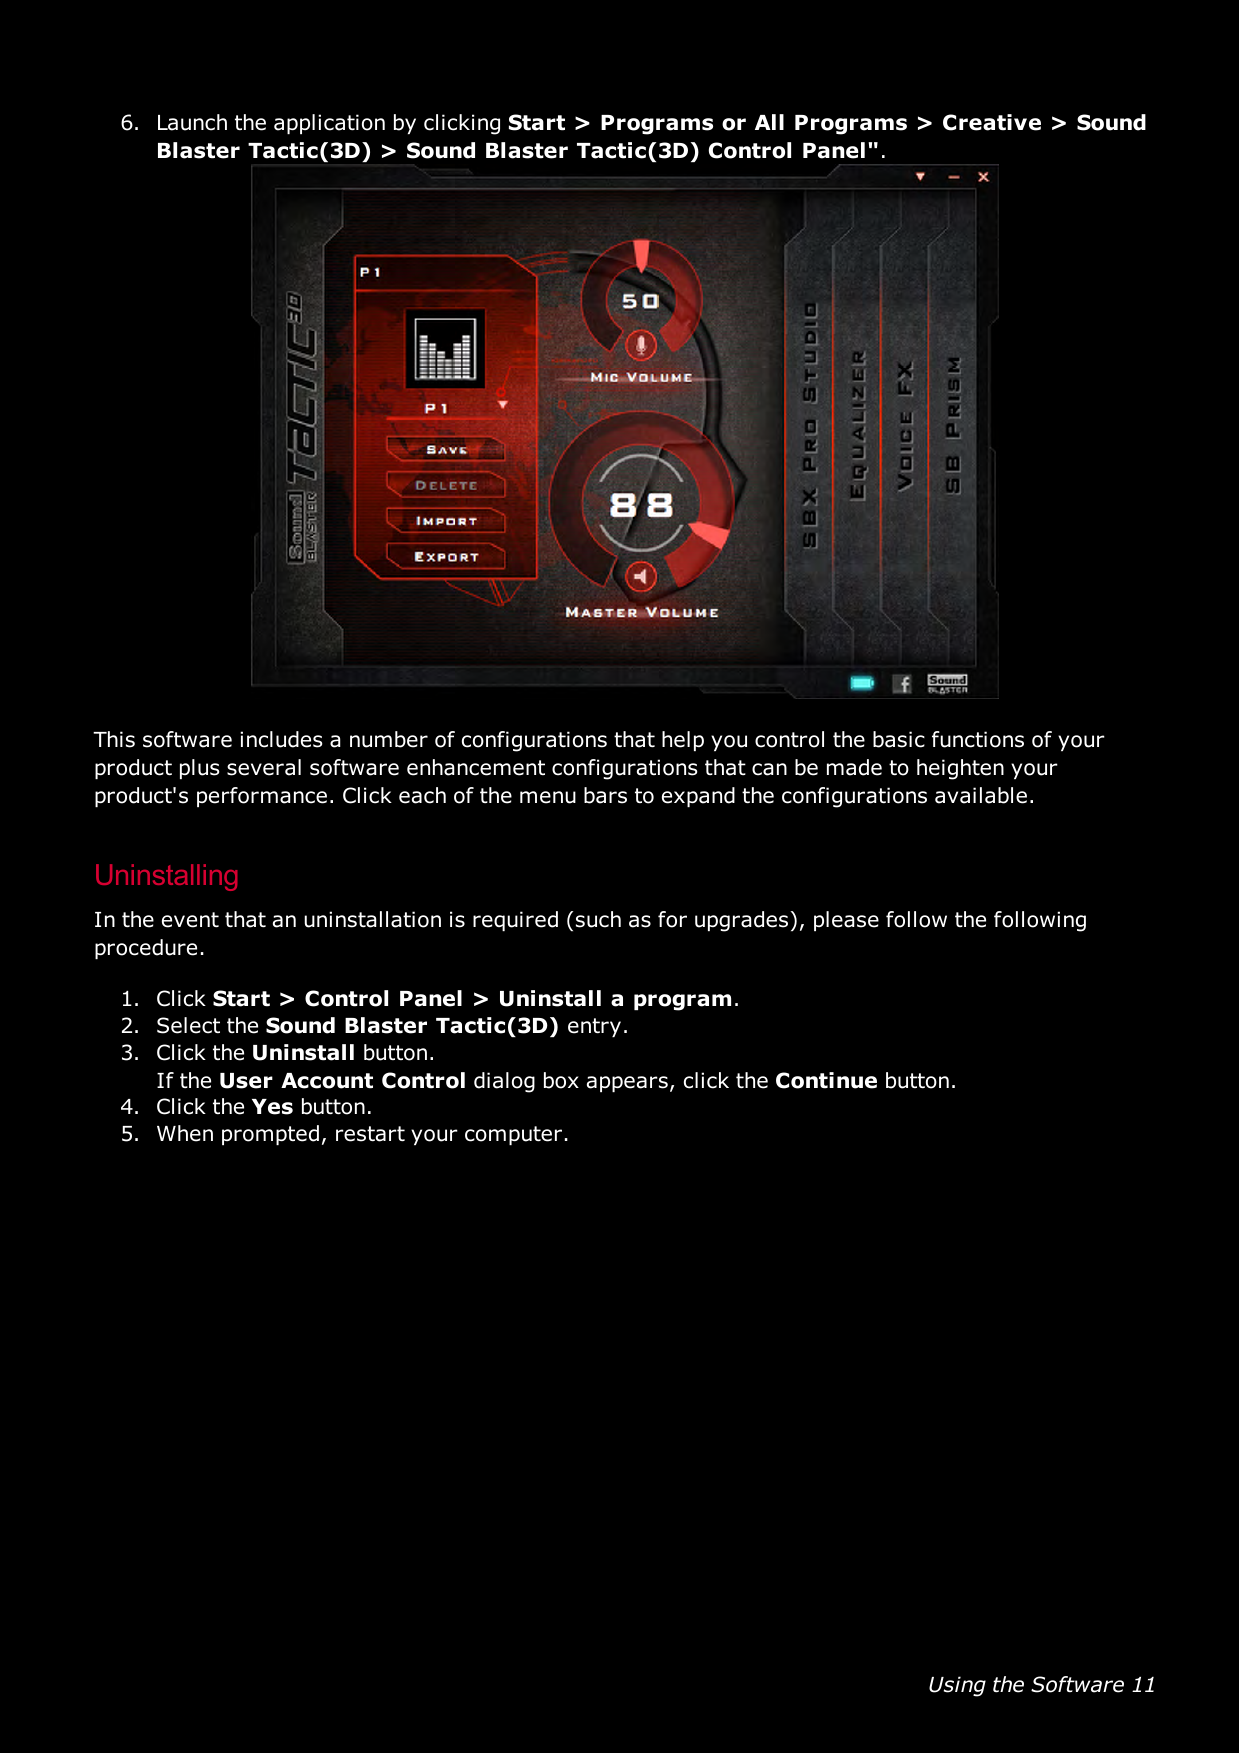 Using the Software 116. Launch the application by clicking Start &gt; Programs or All Programs &gt; Creative &gt;SoundBlaster Tactic(3D) &gt; Sound Blaster Tactic(3D) Control Panel&quot;.This software includes a number of configurations that help you control the basic functions of yourproduct plus several software enhancement configurations that can be made to heighten yourproduct&apos;s performance. Click each of the menu bars to expand the configurations available.UninstallingIn the event that an uninstallation is required (such as for upgrades), please follow the followingprocedure.1. Click Start &gt; Control Panel &gt; Uninstall a program.2. Select the Sound Blaster Tactic(3D) entry.3. Click the Uninstall button.If the User Account Control dialog box appears, click the Continue button.4. Click the Yes button.5. When prompted, restart your computer.